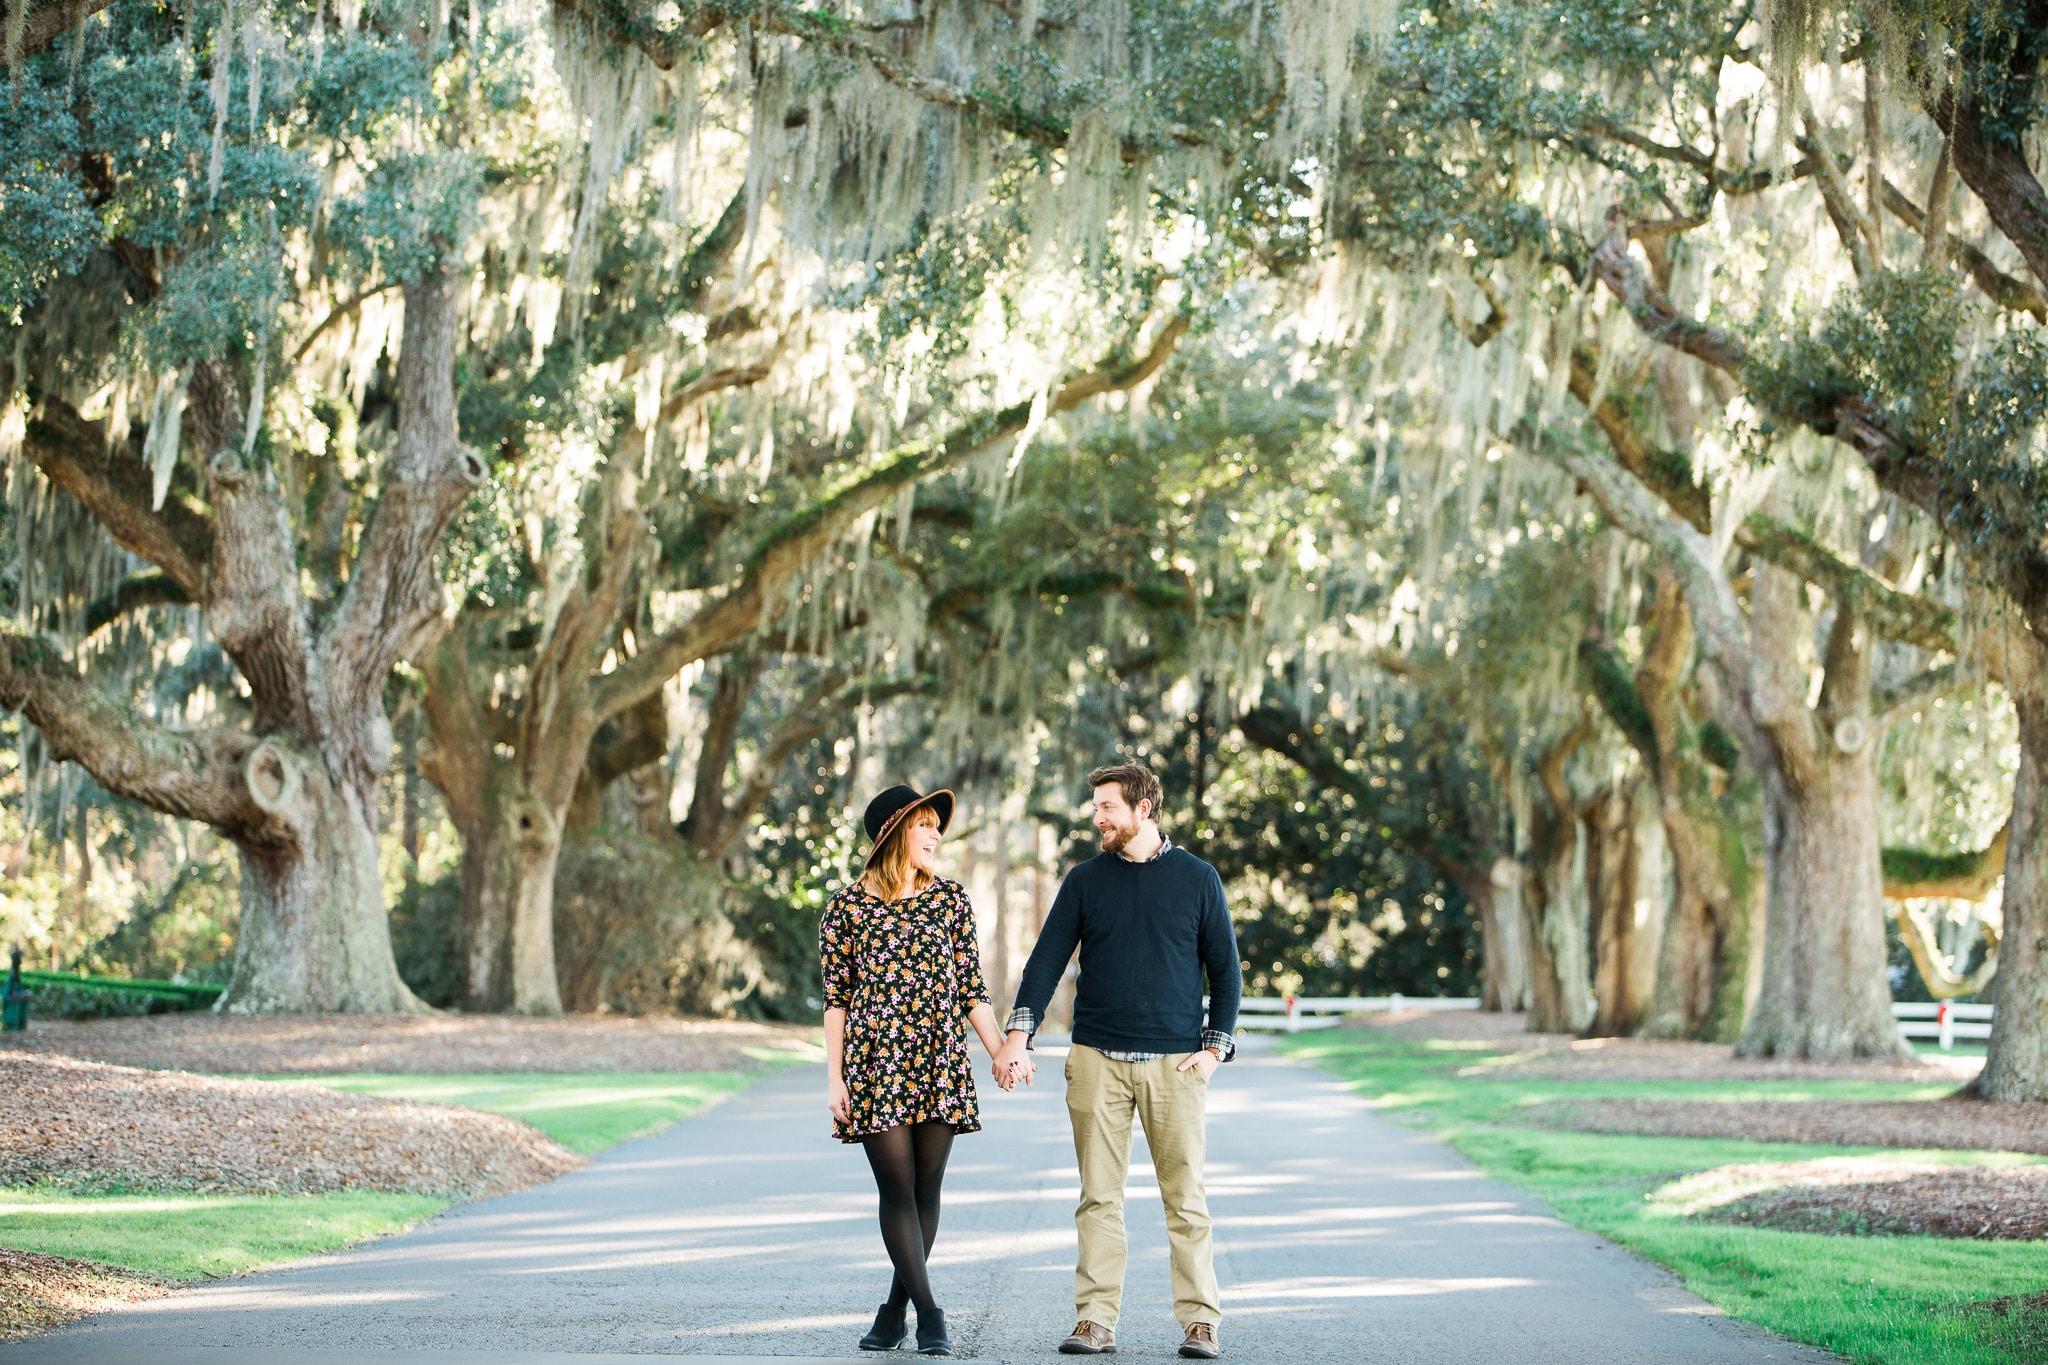 Brian and Kelsey walking along under a tree covered walkway, Caledonia Golf and Fish Club, Myrtle Beach Engagement Session 14, www.onelifephoto.net